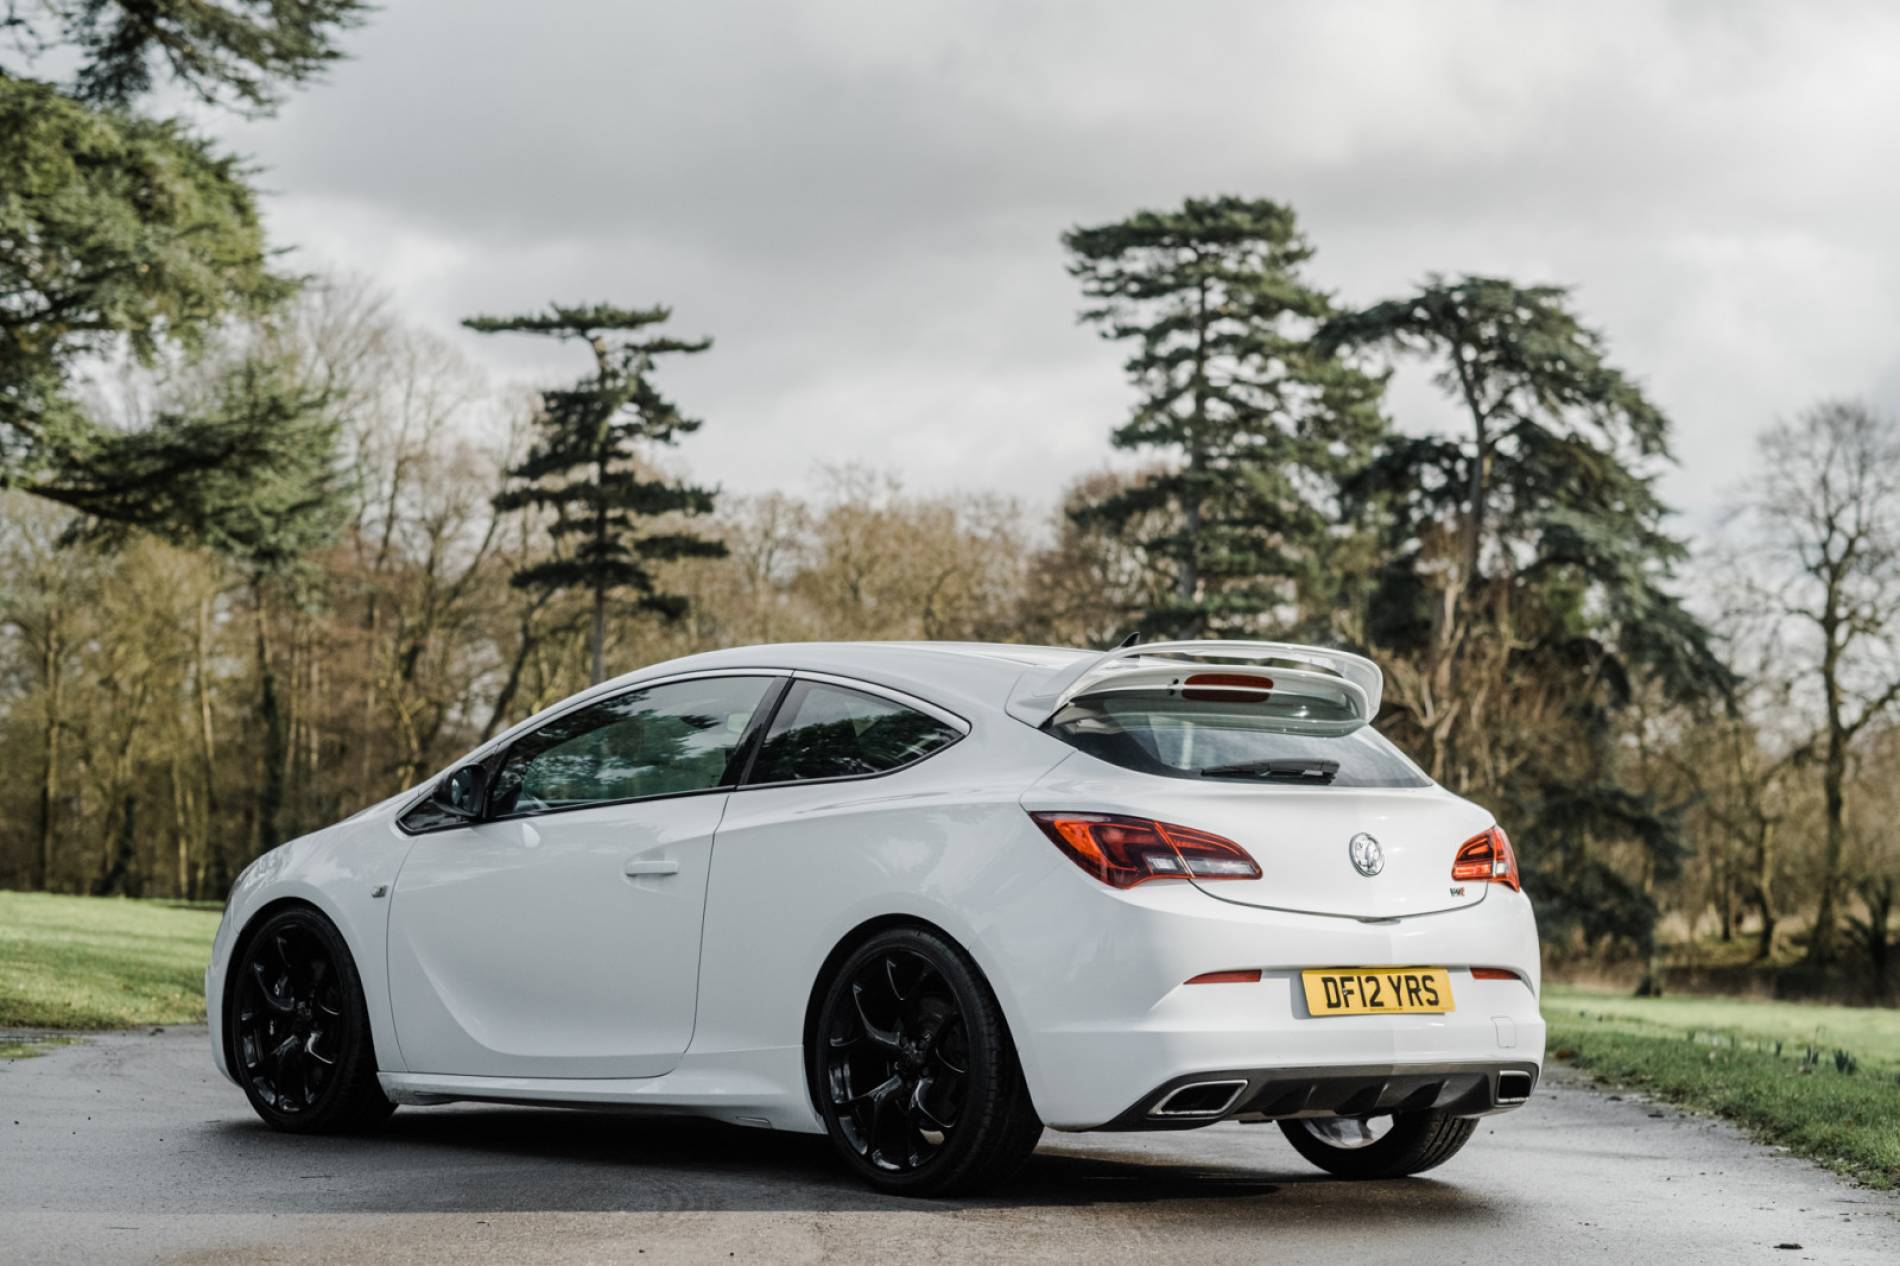 Vauxhall Astra VXR RSS Forged 440HP